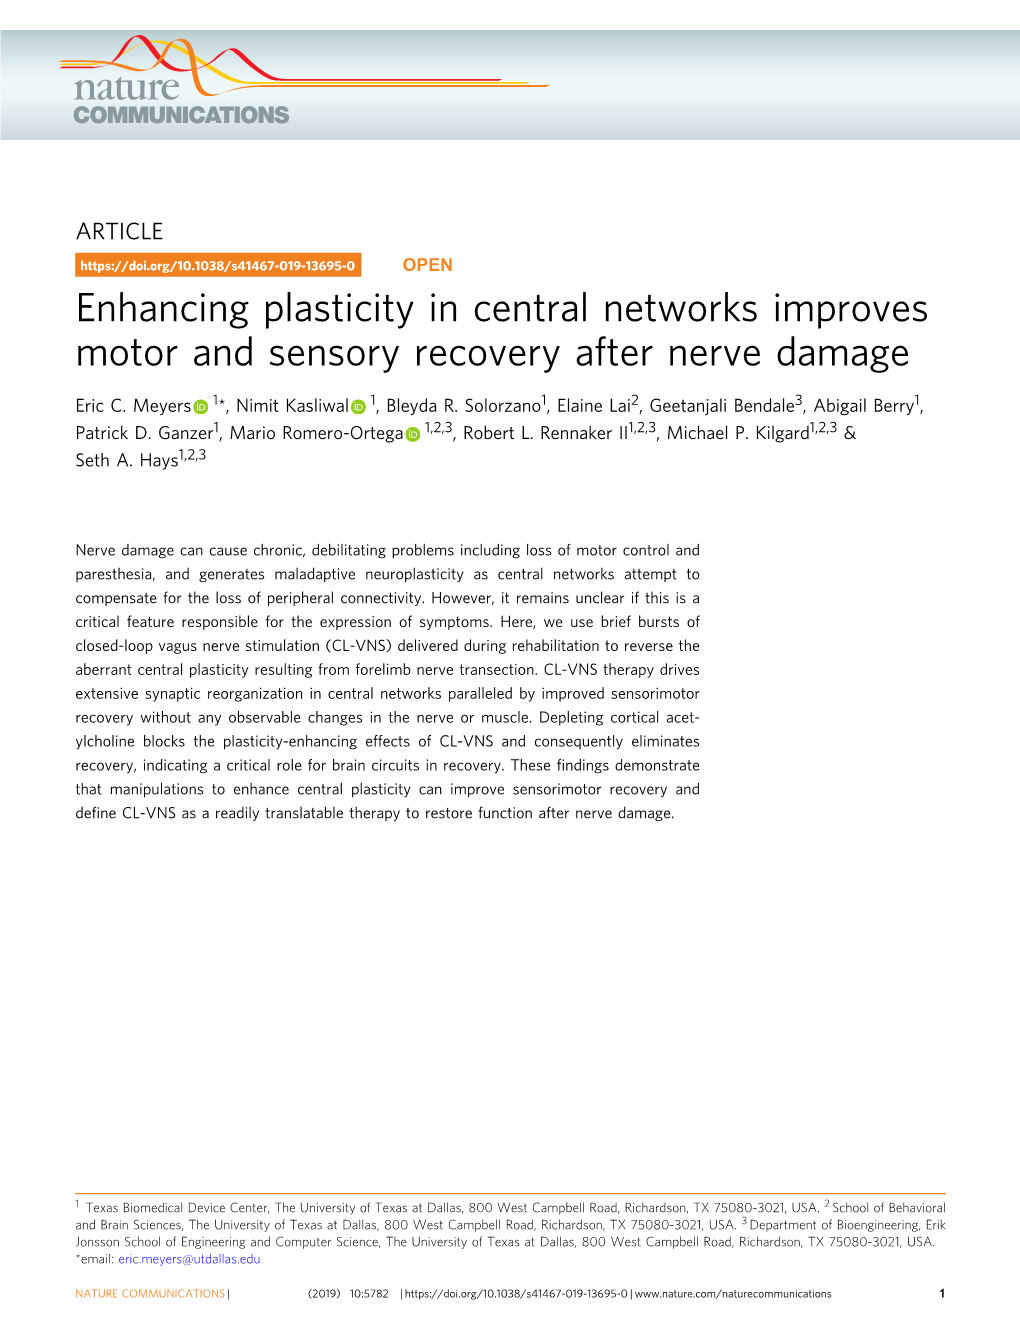 Enhancing Plasticity in Central Networks Improves Motor and Sensory Recovery After Nerve Damage